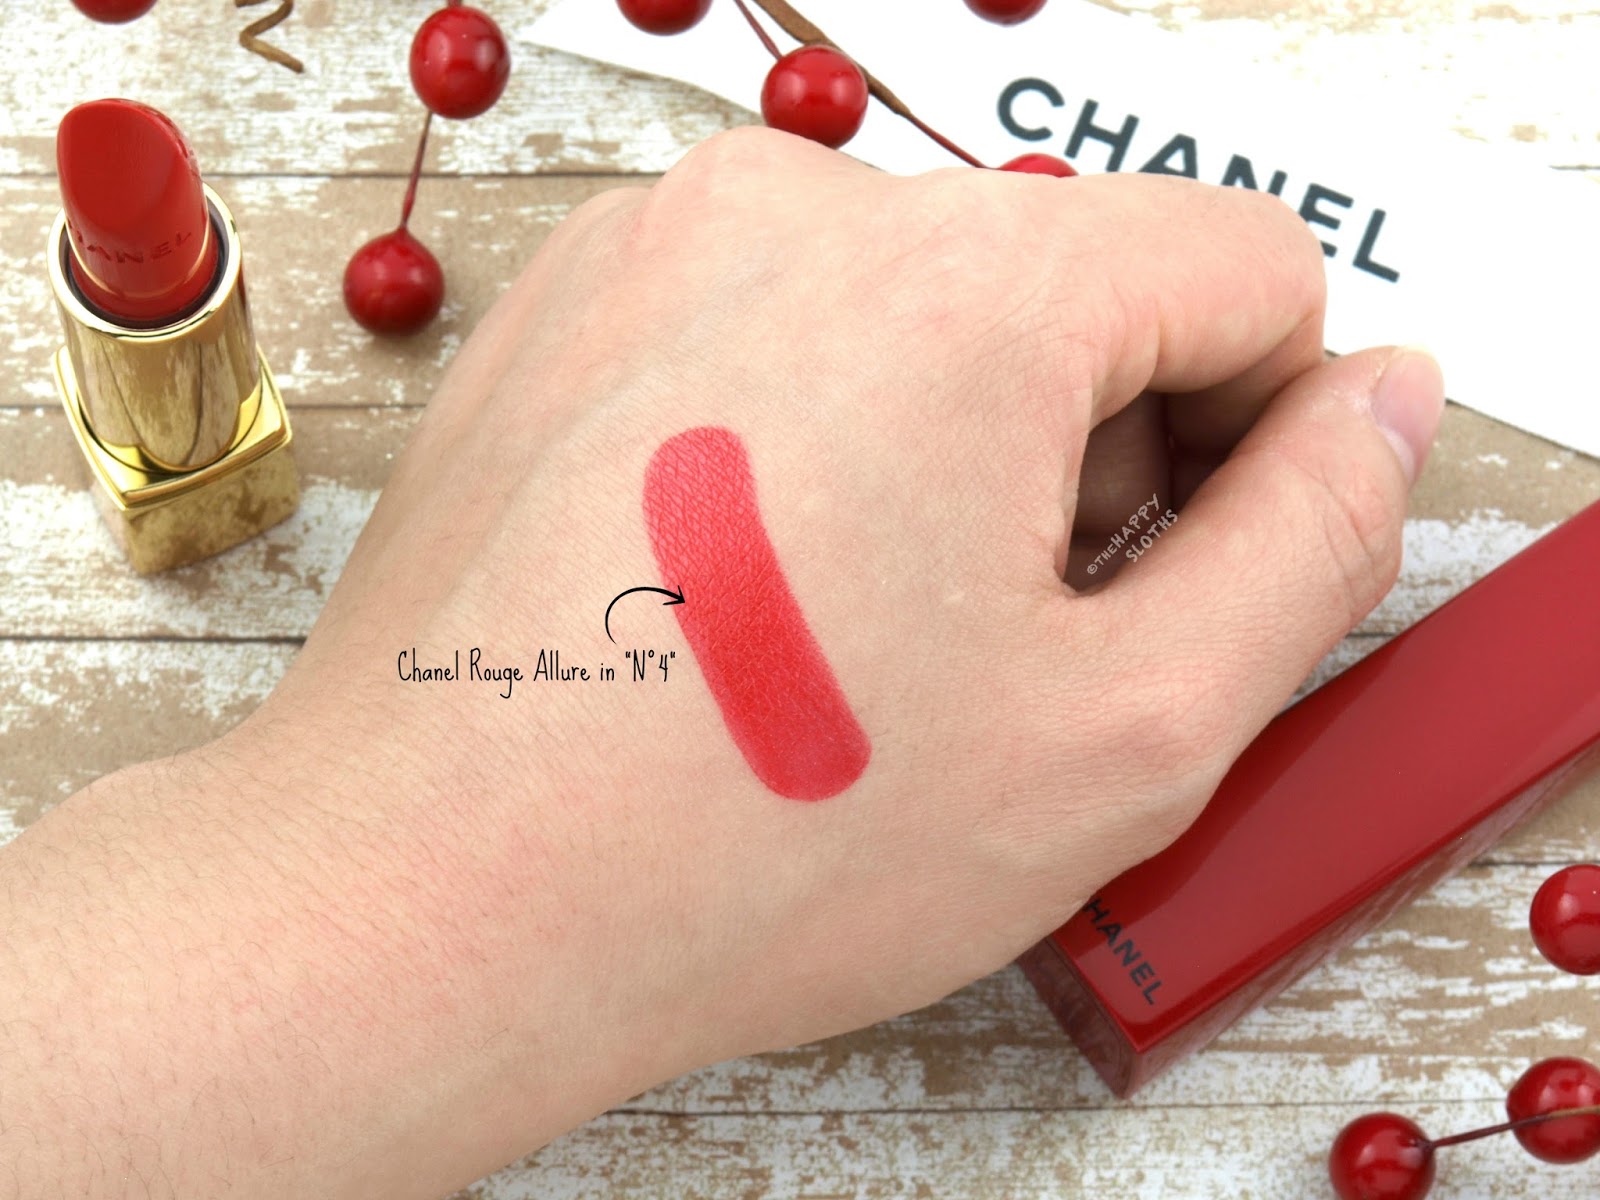 Chanel Holiday 2017 | Rouge Allure Lipstick in "N°4": Review and Swatches